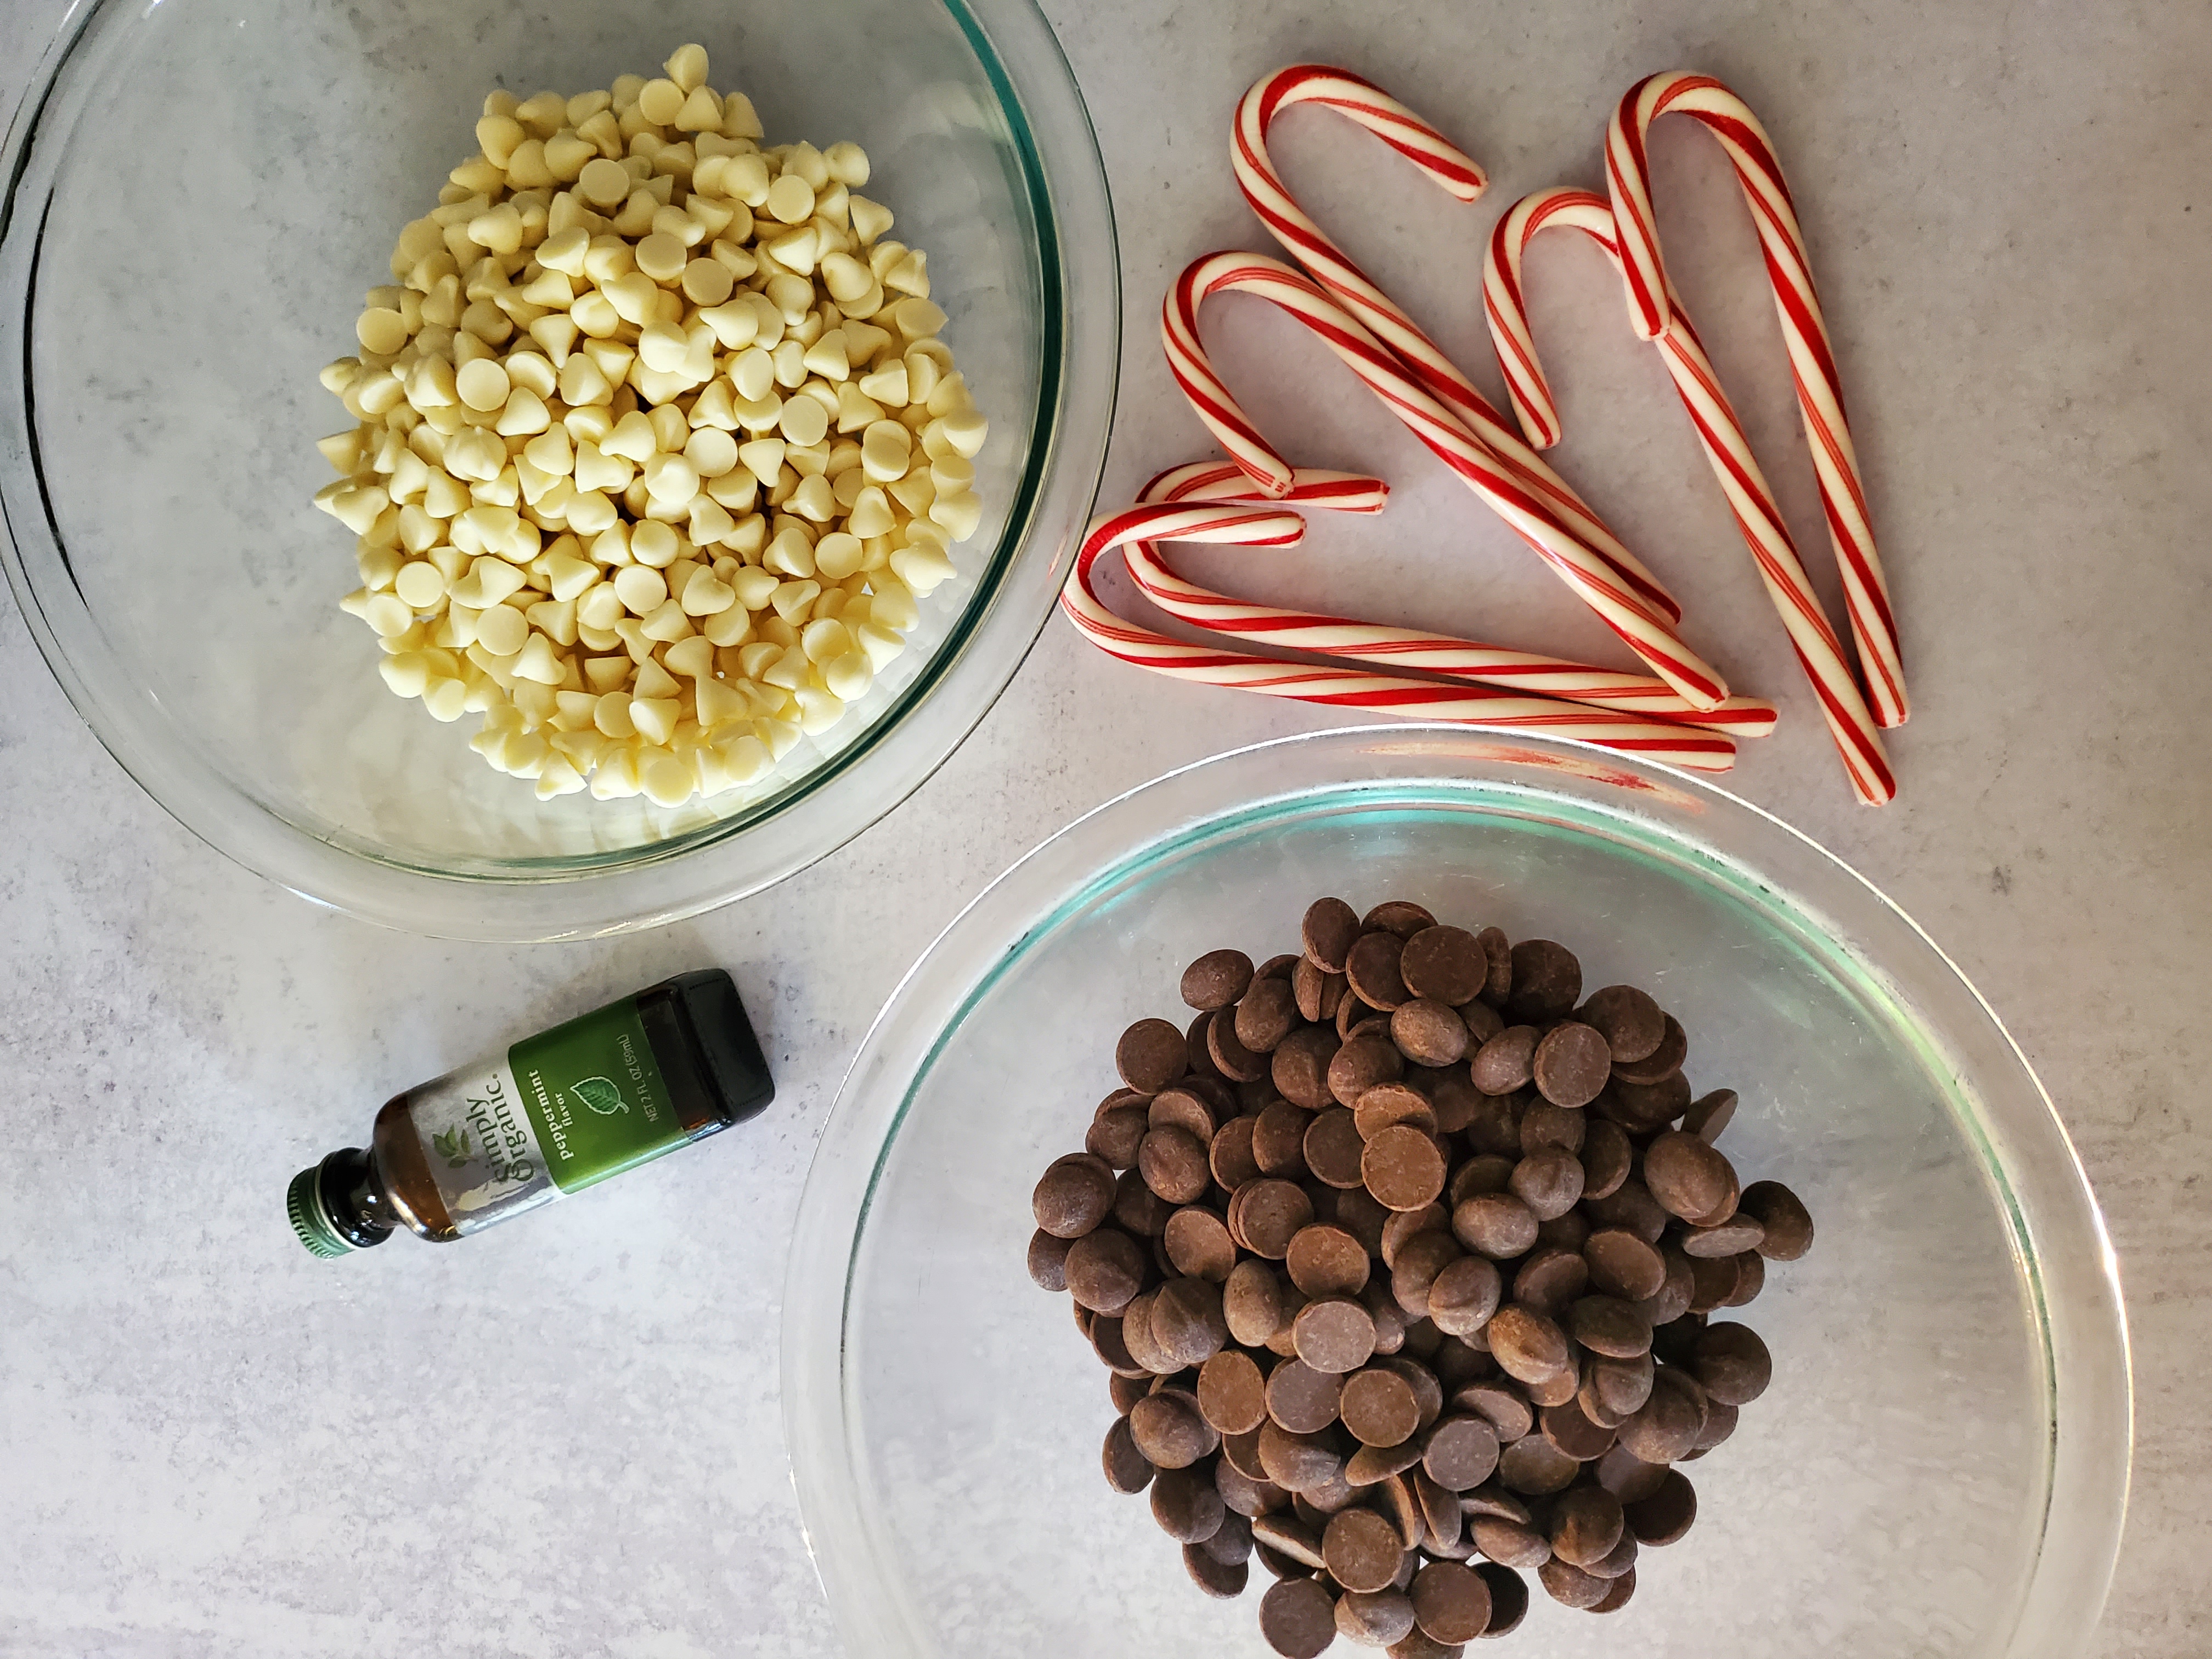 peppermint bark ingredients:  dark chocolate, white chocolate, peppermint oil, candy canes